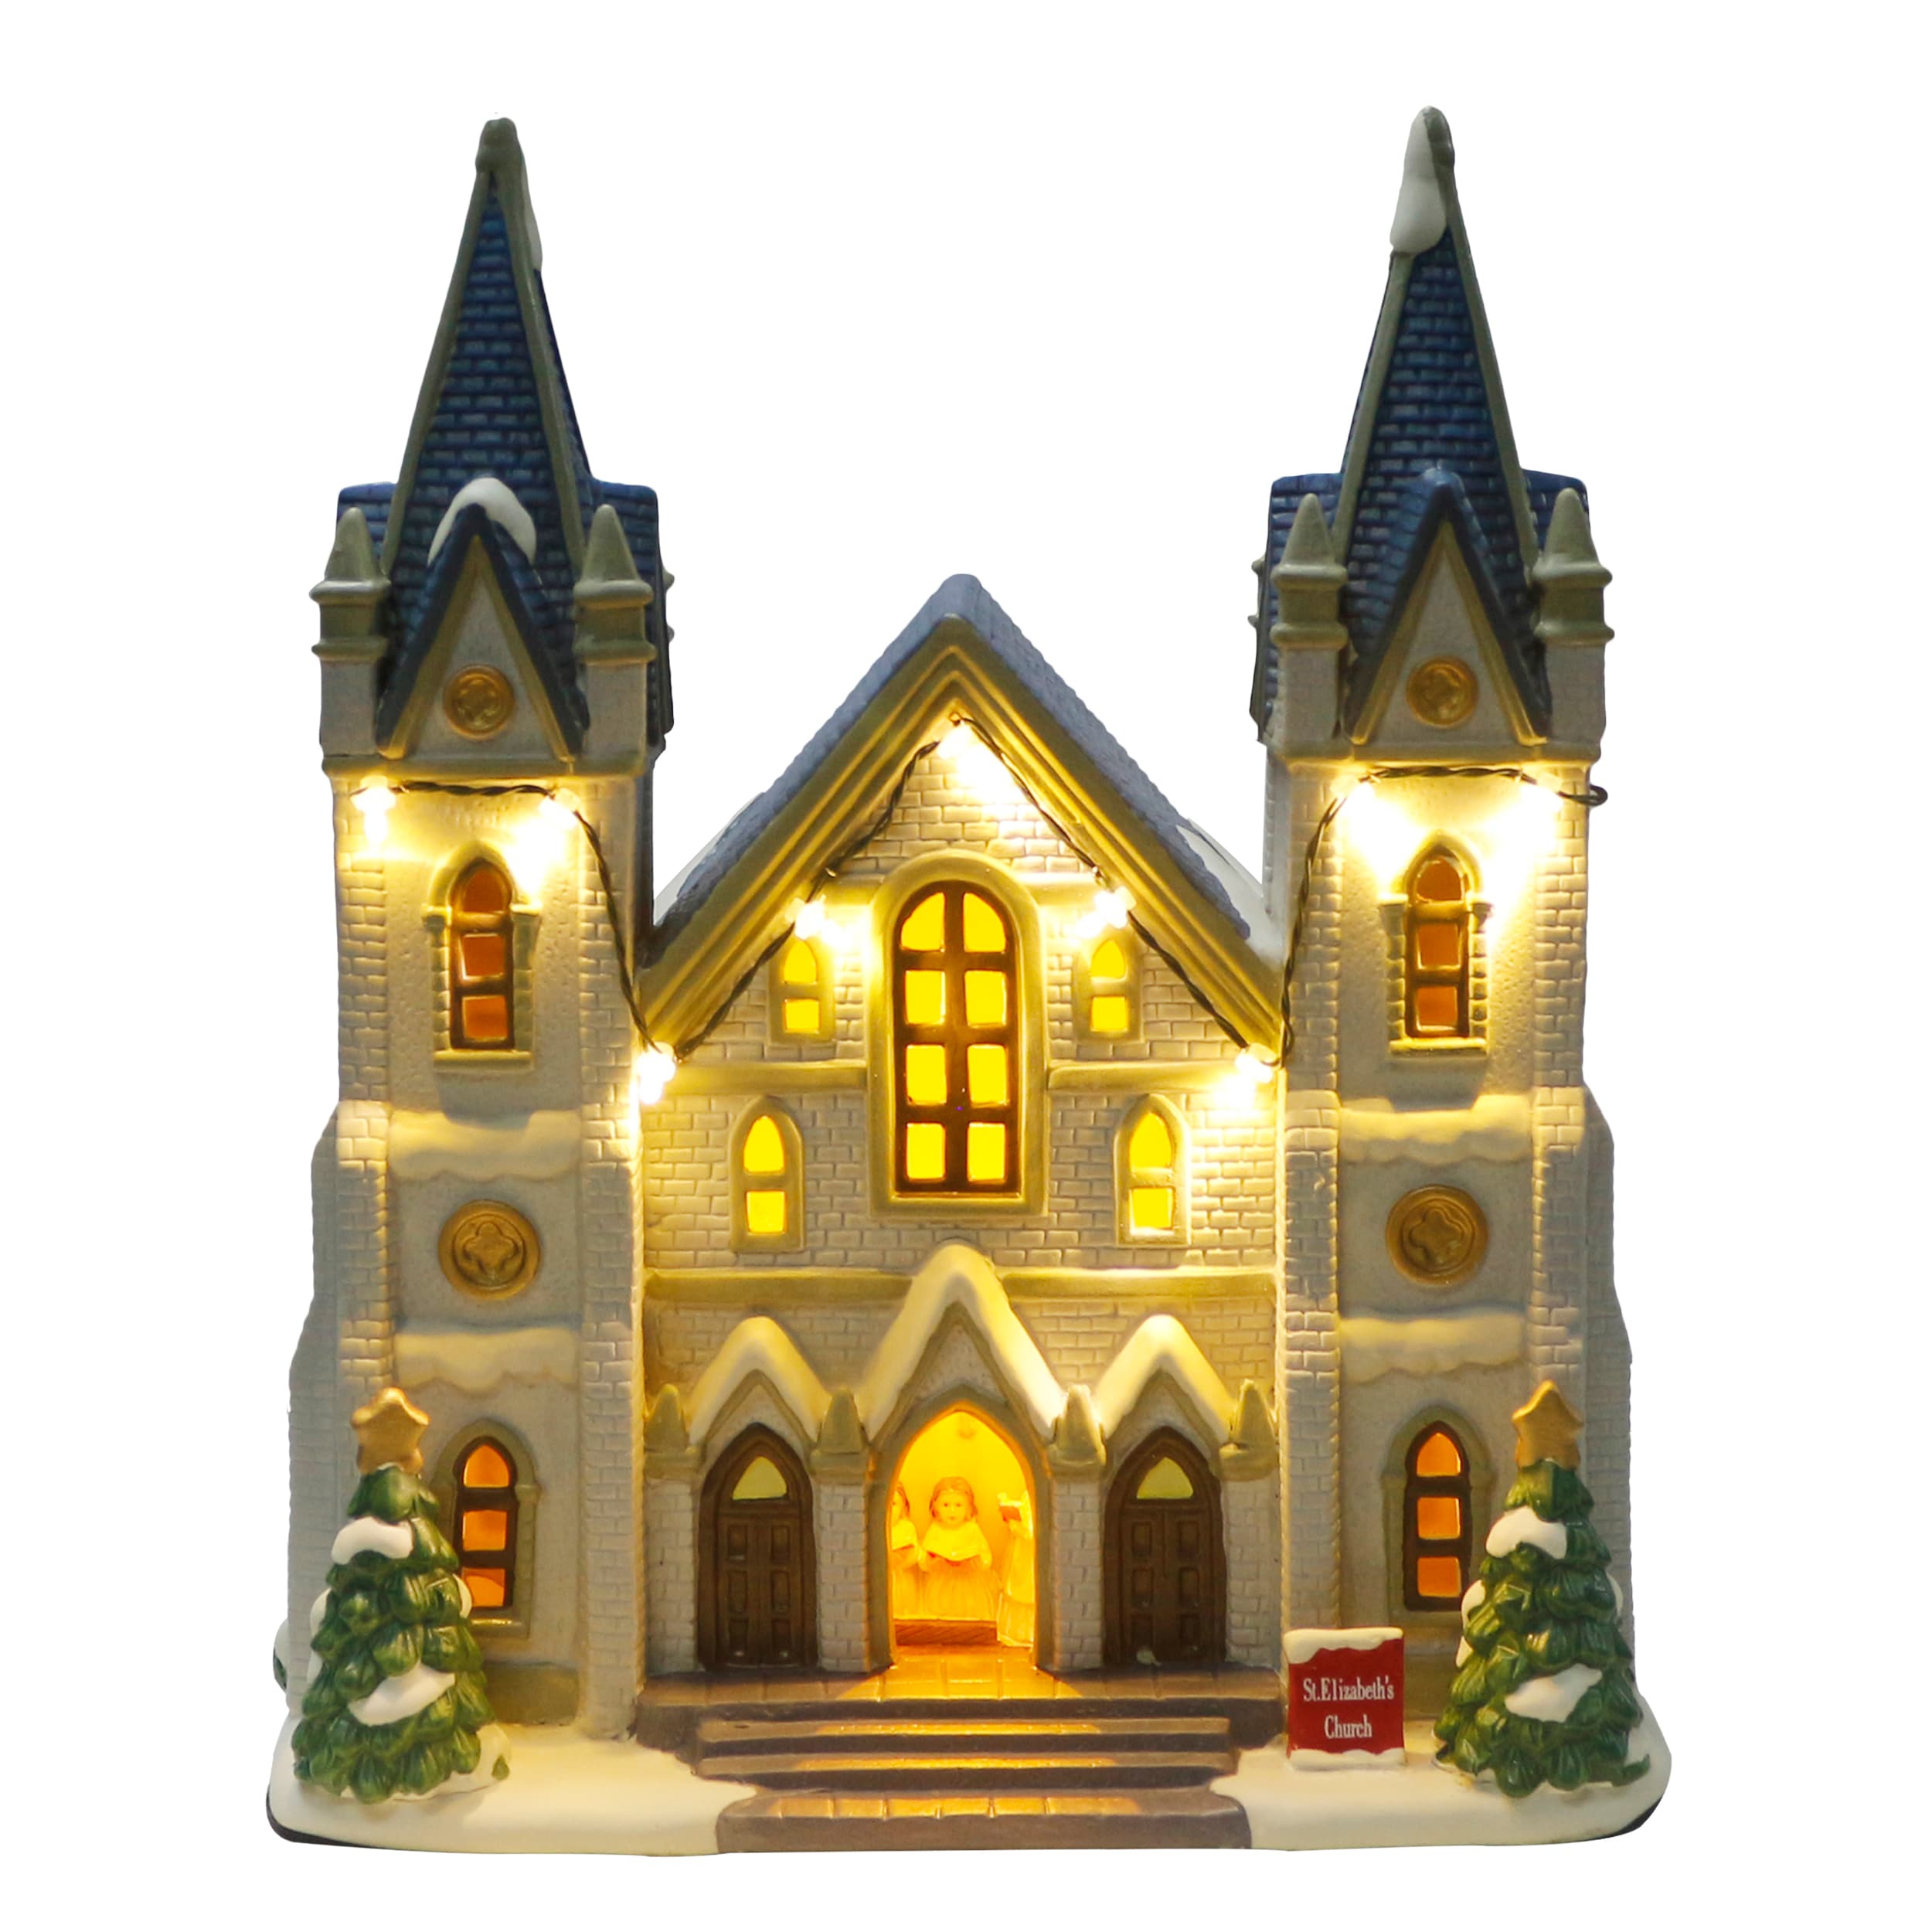 Christmas Village - Decoritive Mini Buildings (4 Pc) Step Back in Time with This New Holiday Collection Set - Church Candy Store Fire Station